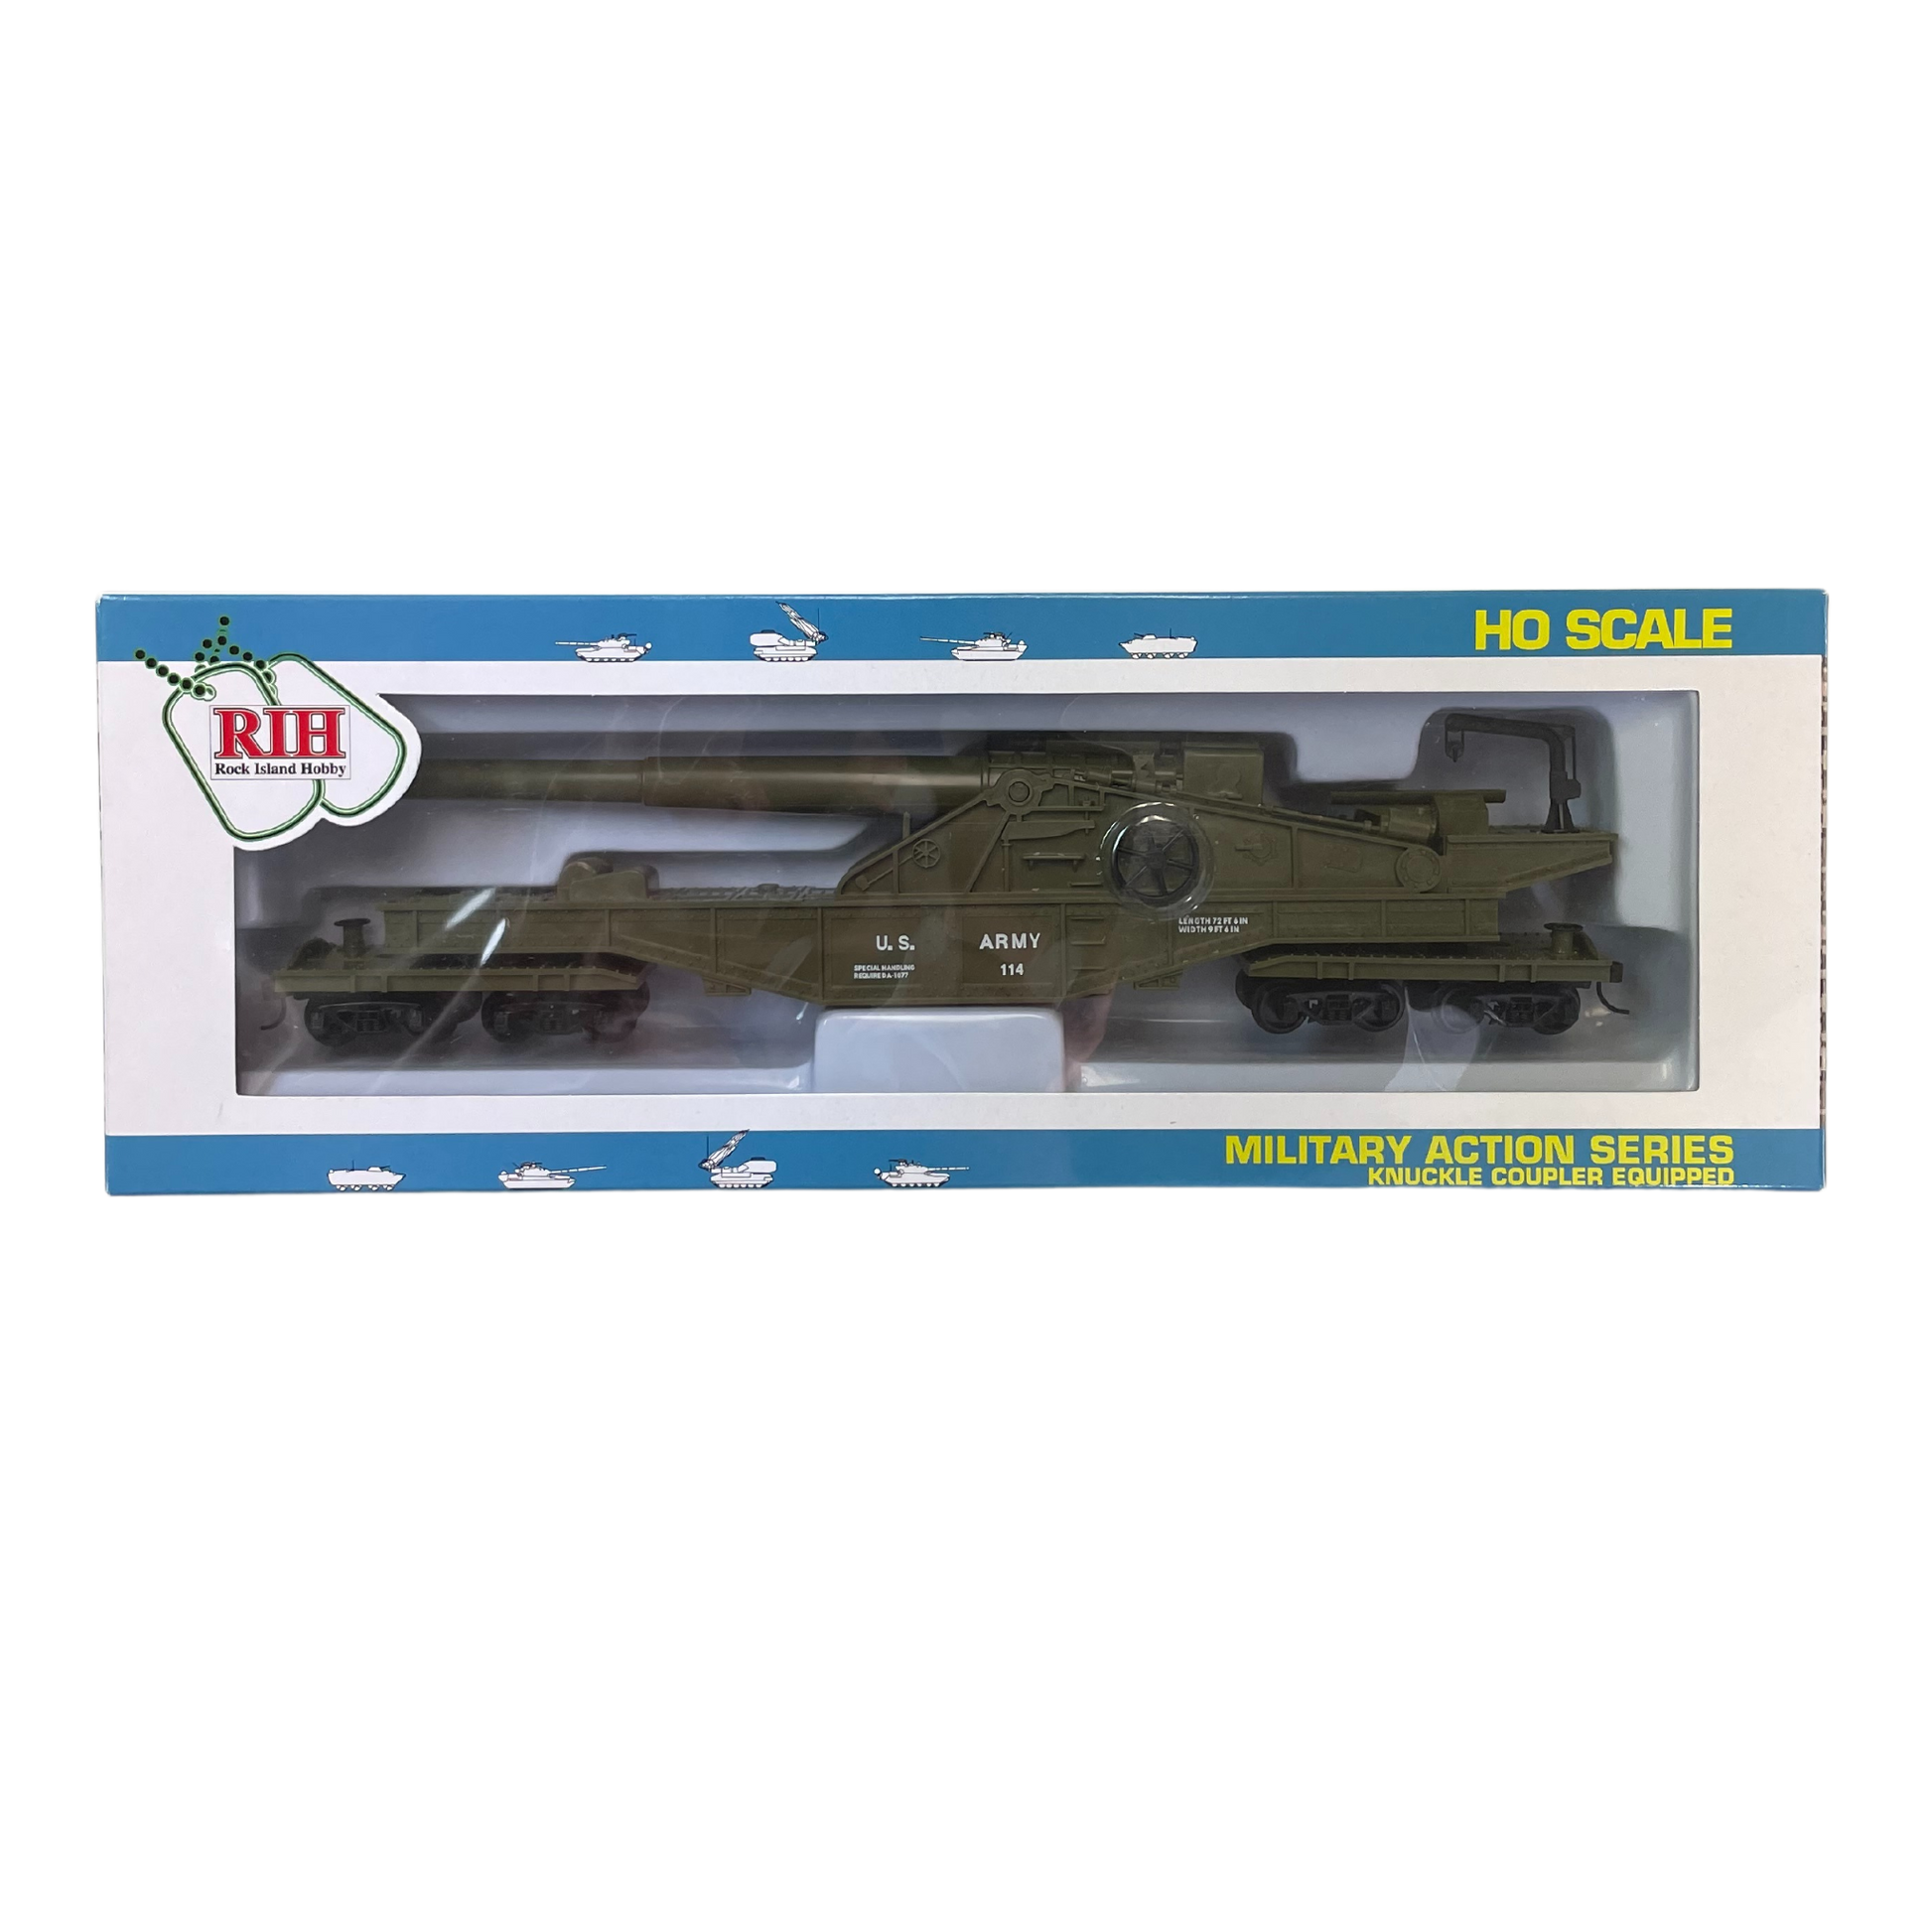 HO scale Military action series 